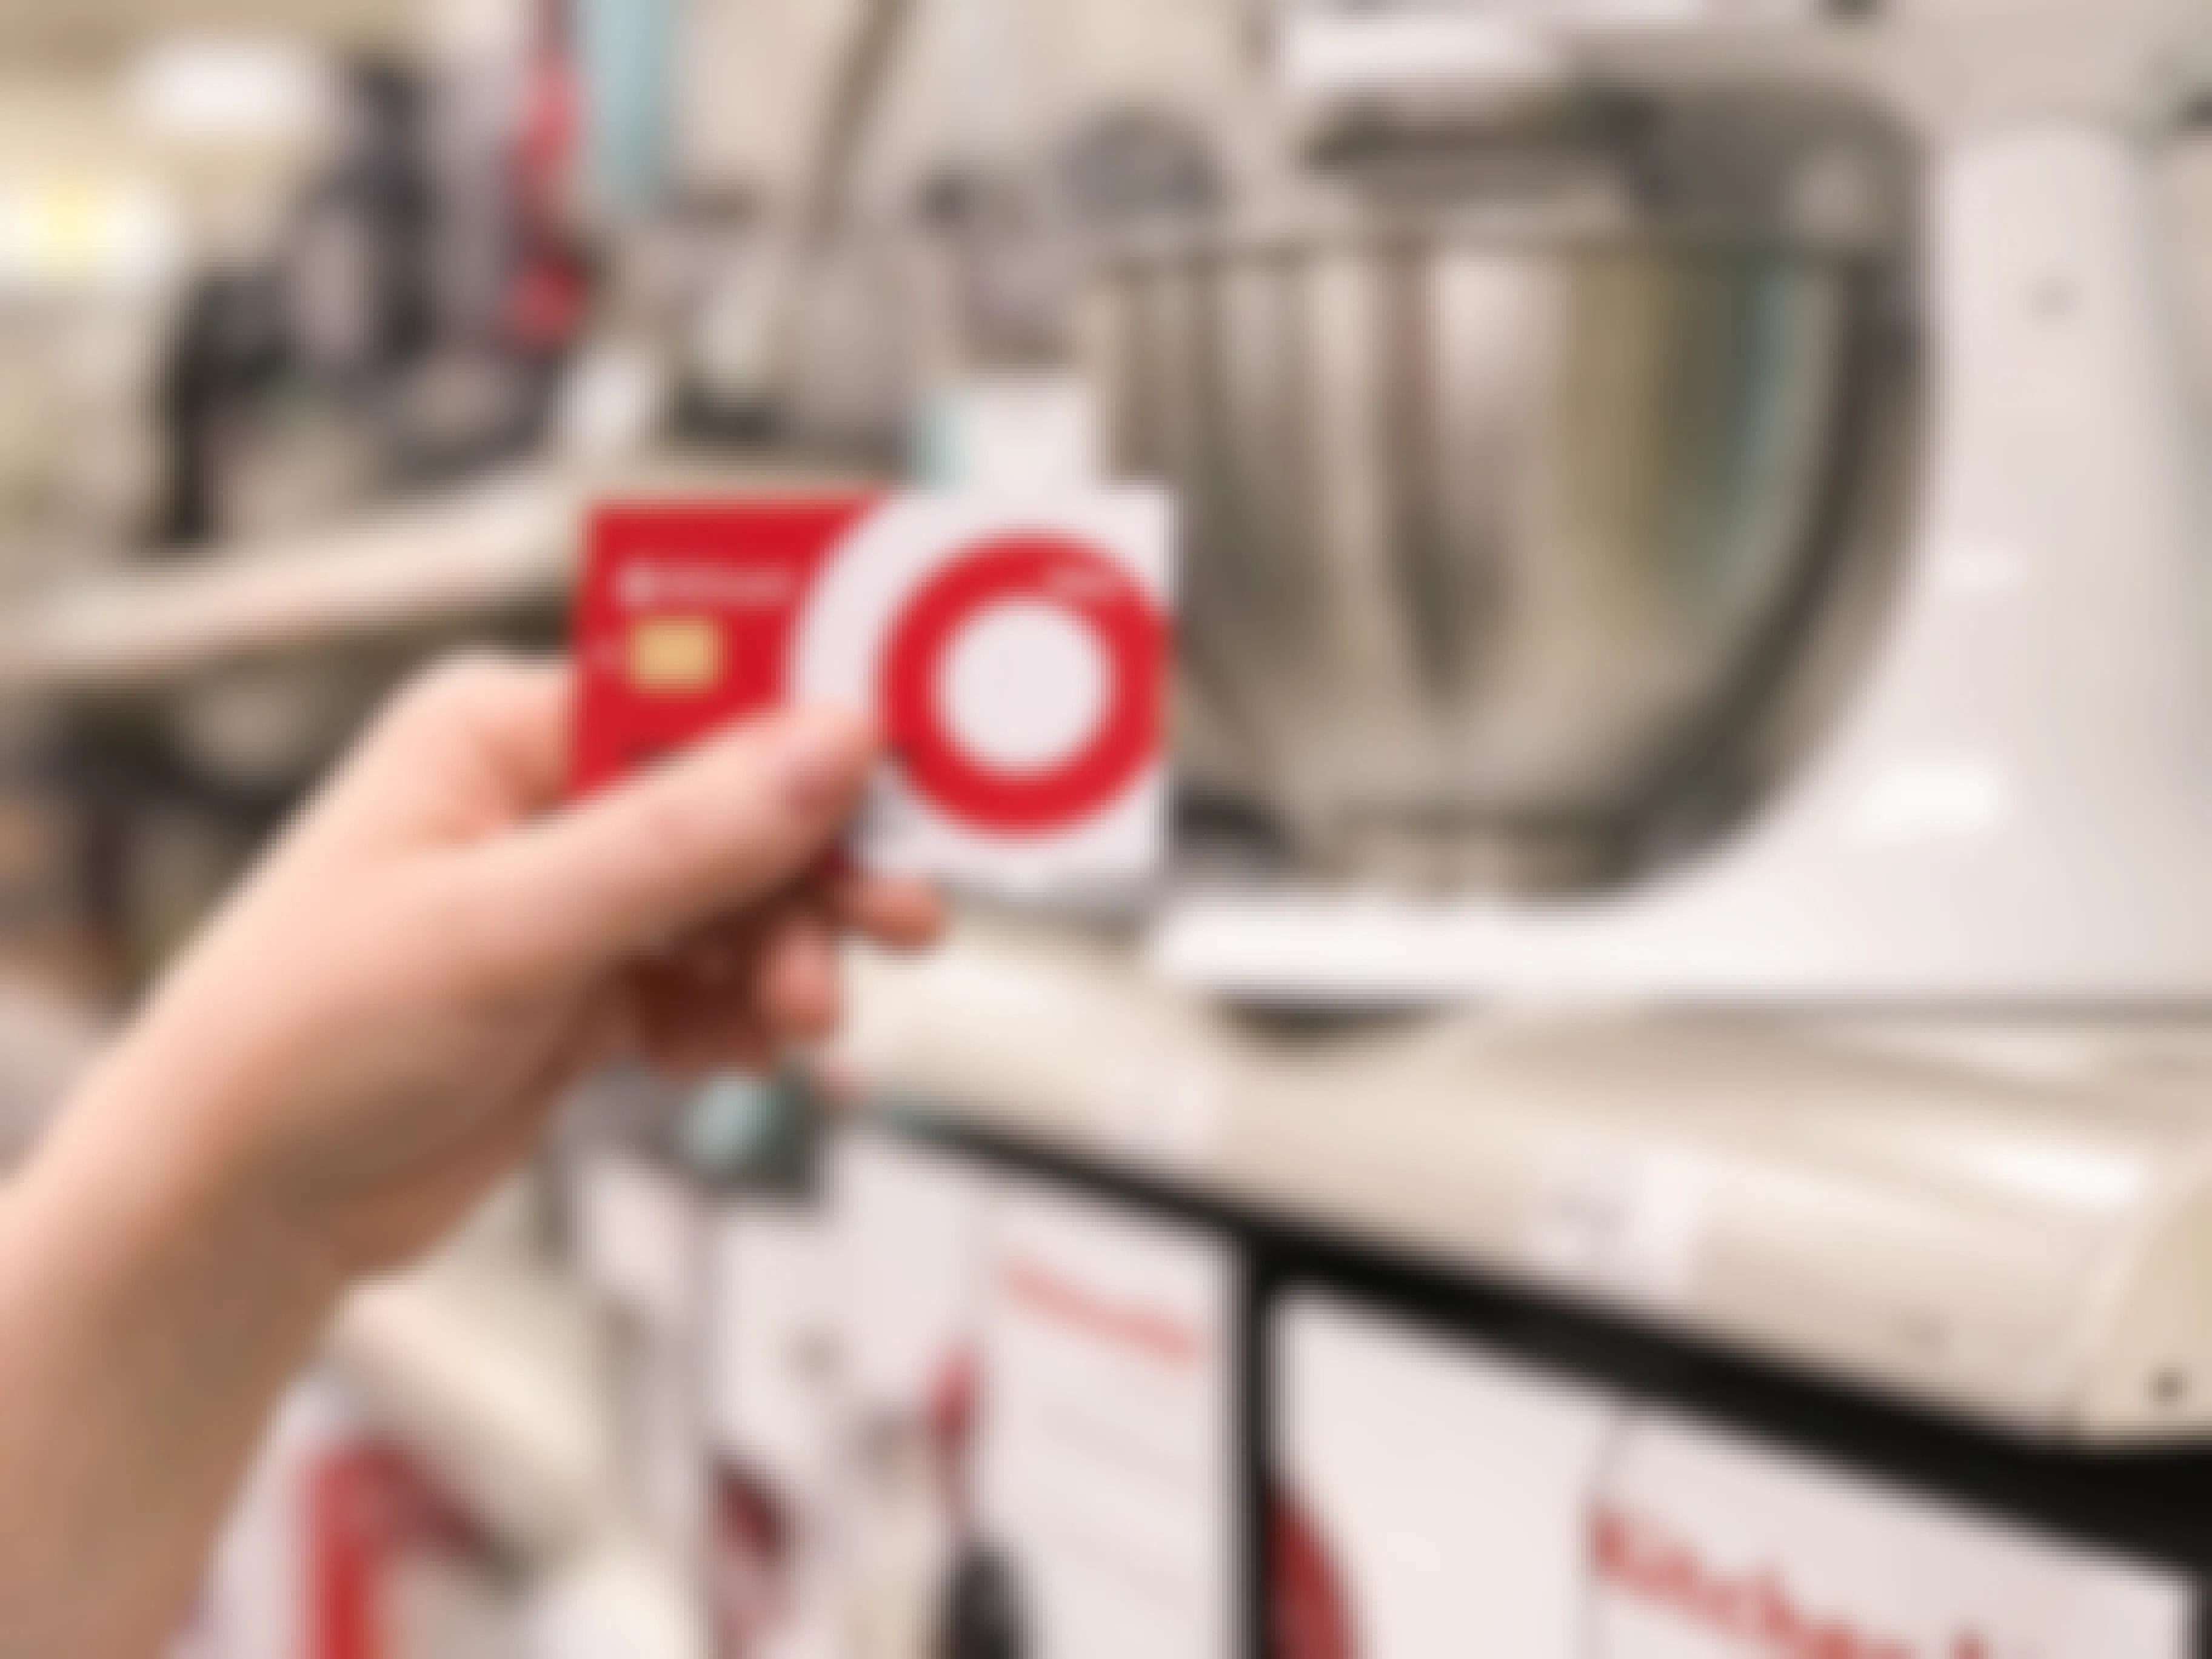 A Target Red card is held in front of Kitchenaid mixers at Target.